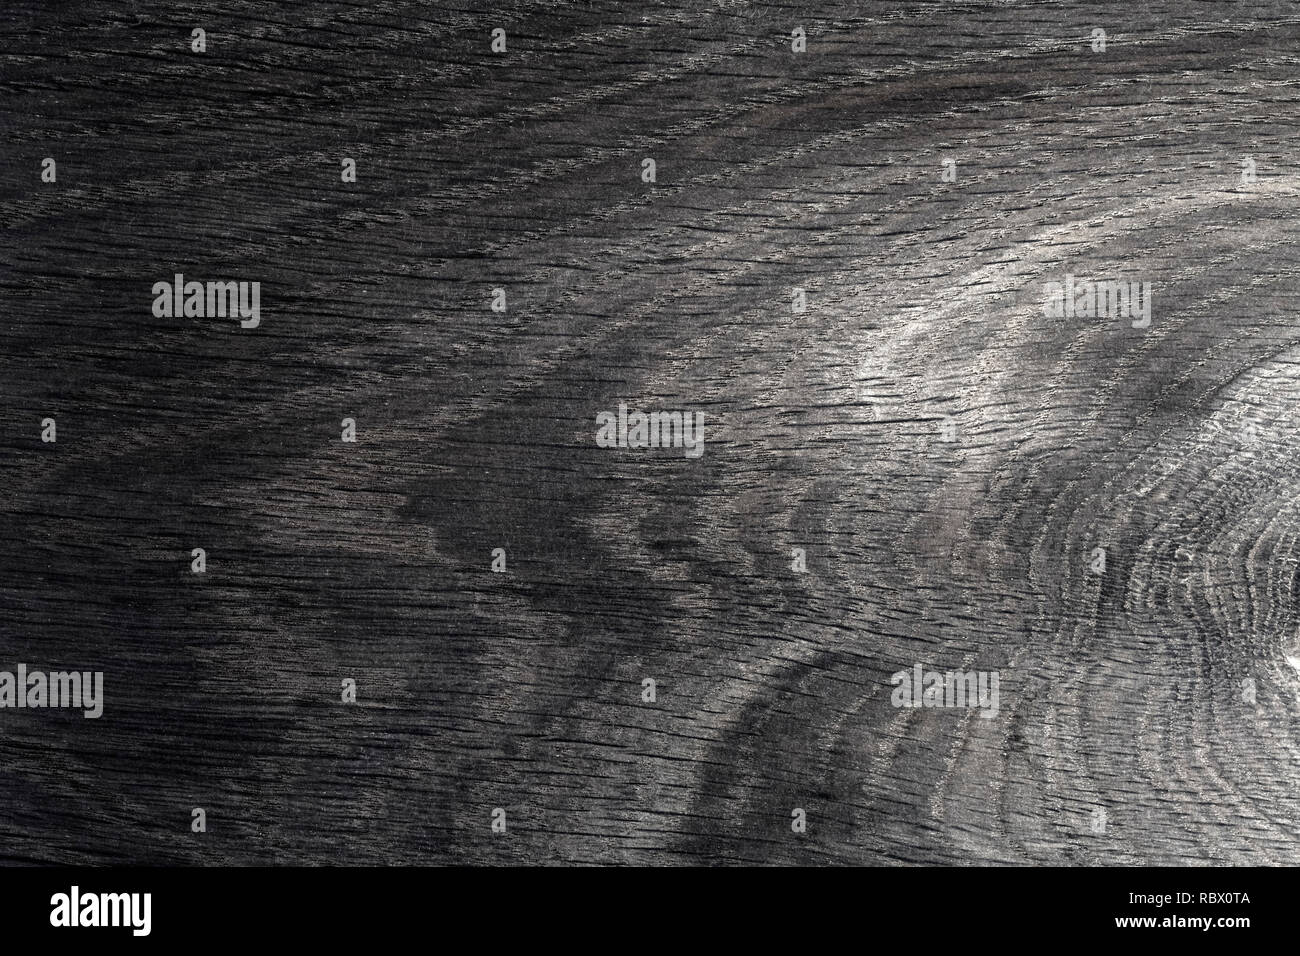 Black oak wooden wall background, texture of dark bark wood with old natural pattern for design. Stock Photo